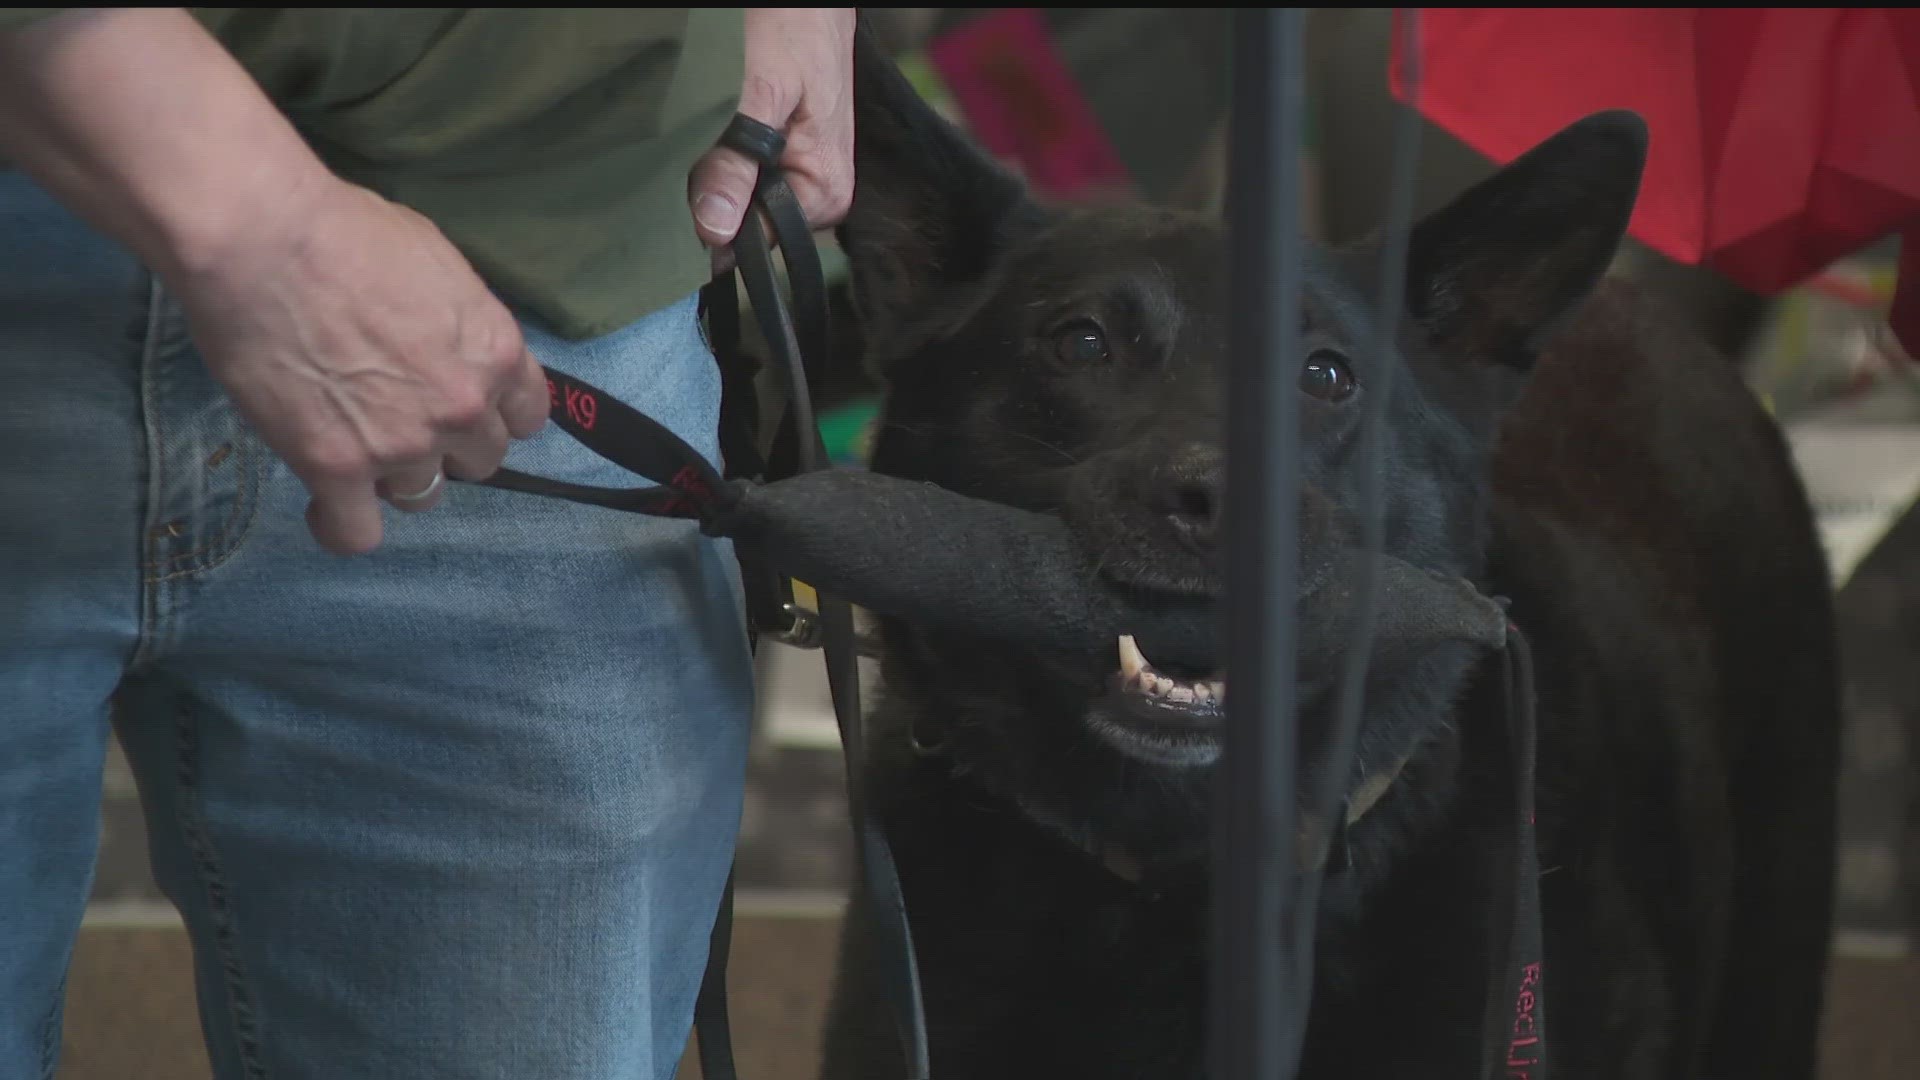 After more than 700 hours on call, the 7-year-old pup had a sendoff complete with puppies from NO Dog Left Behind.